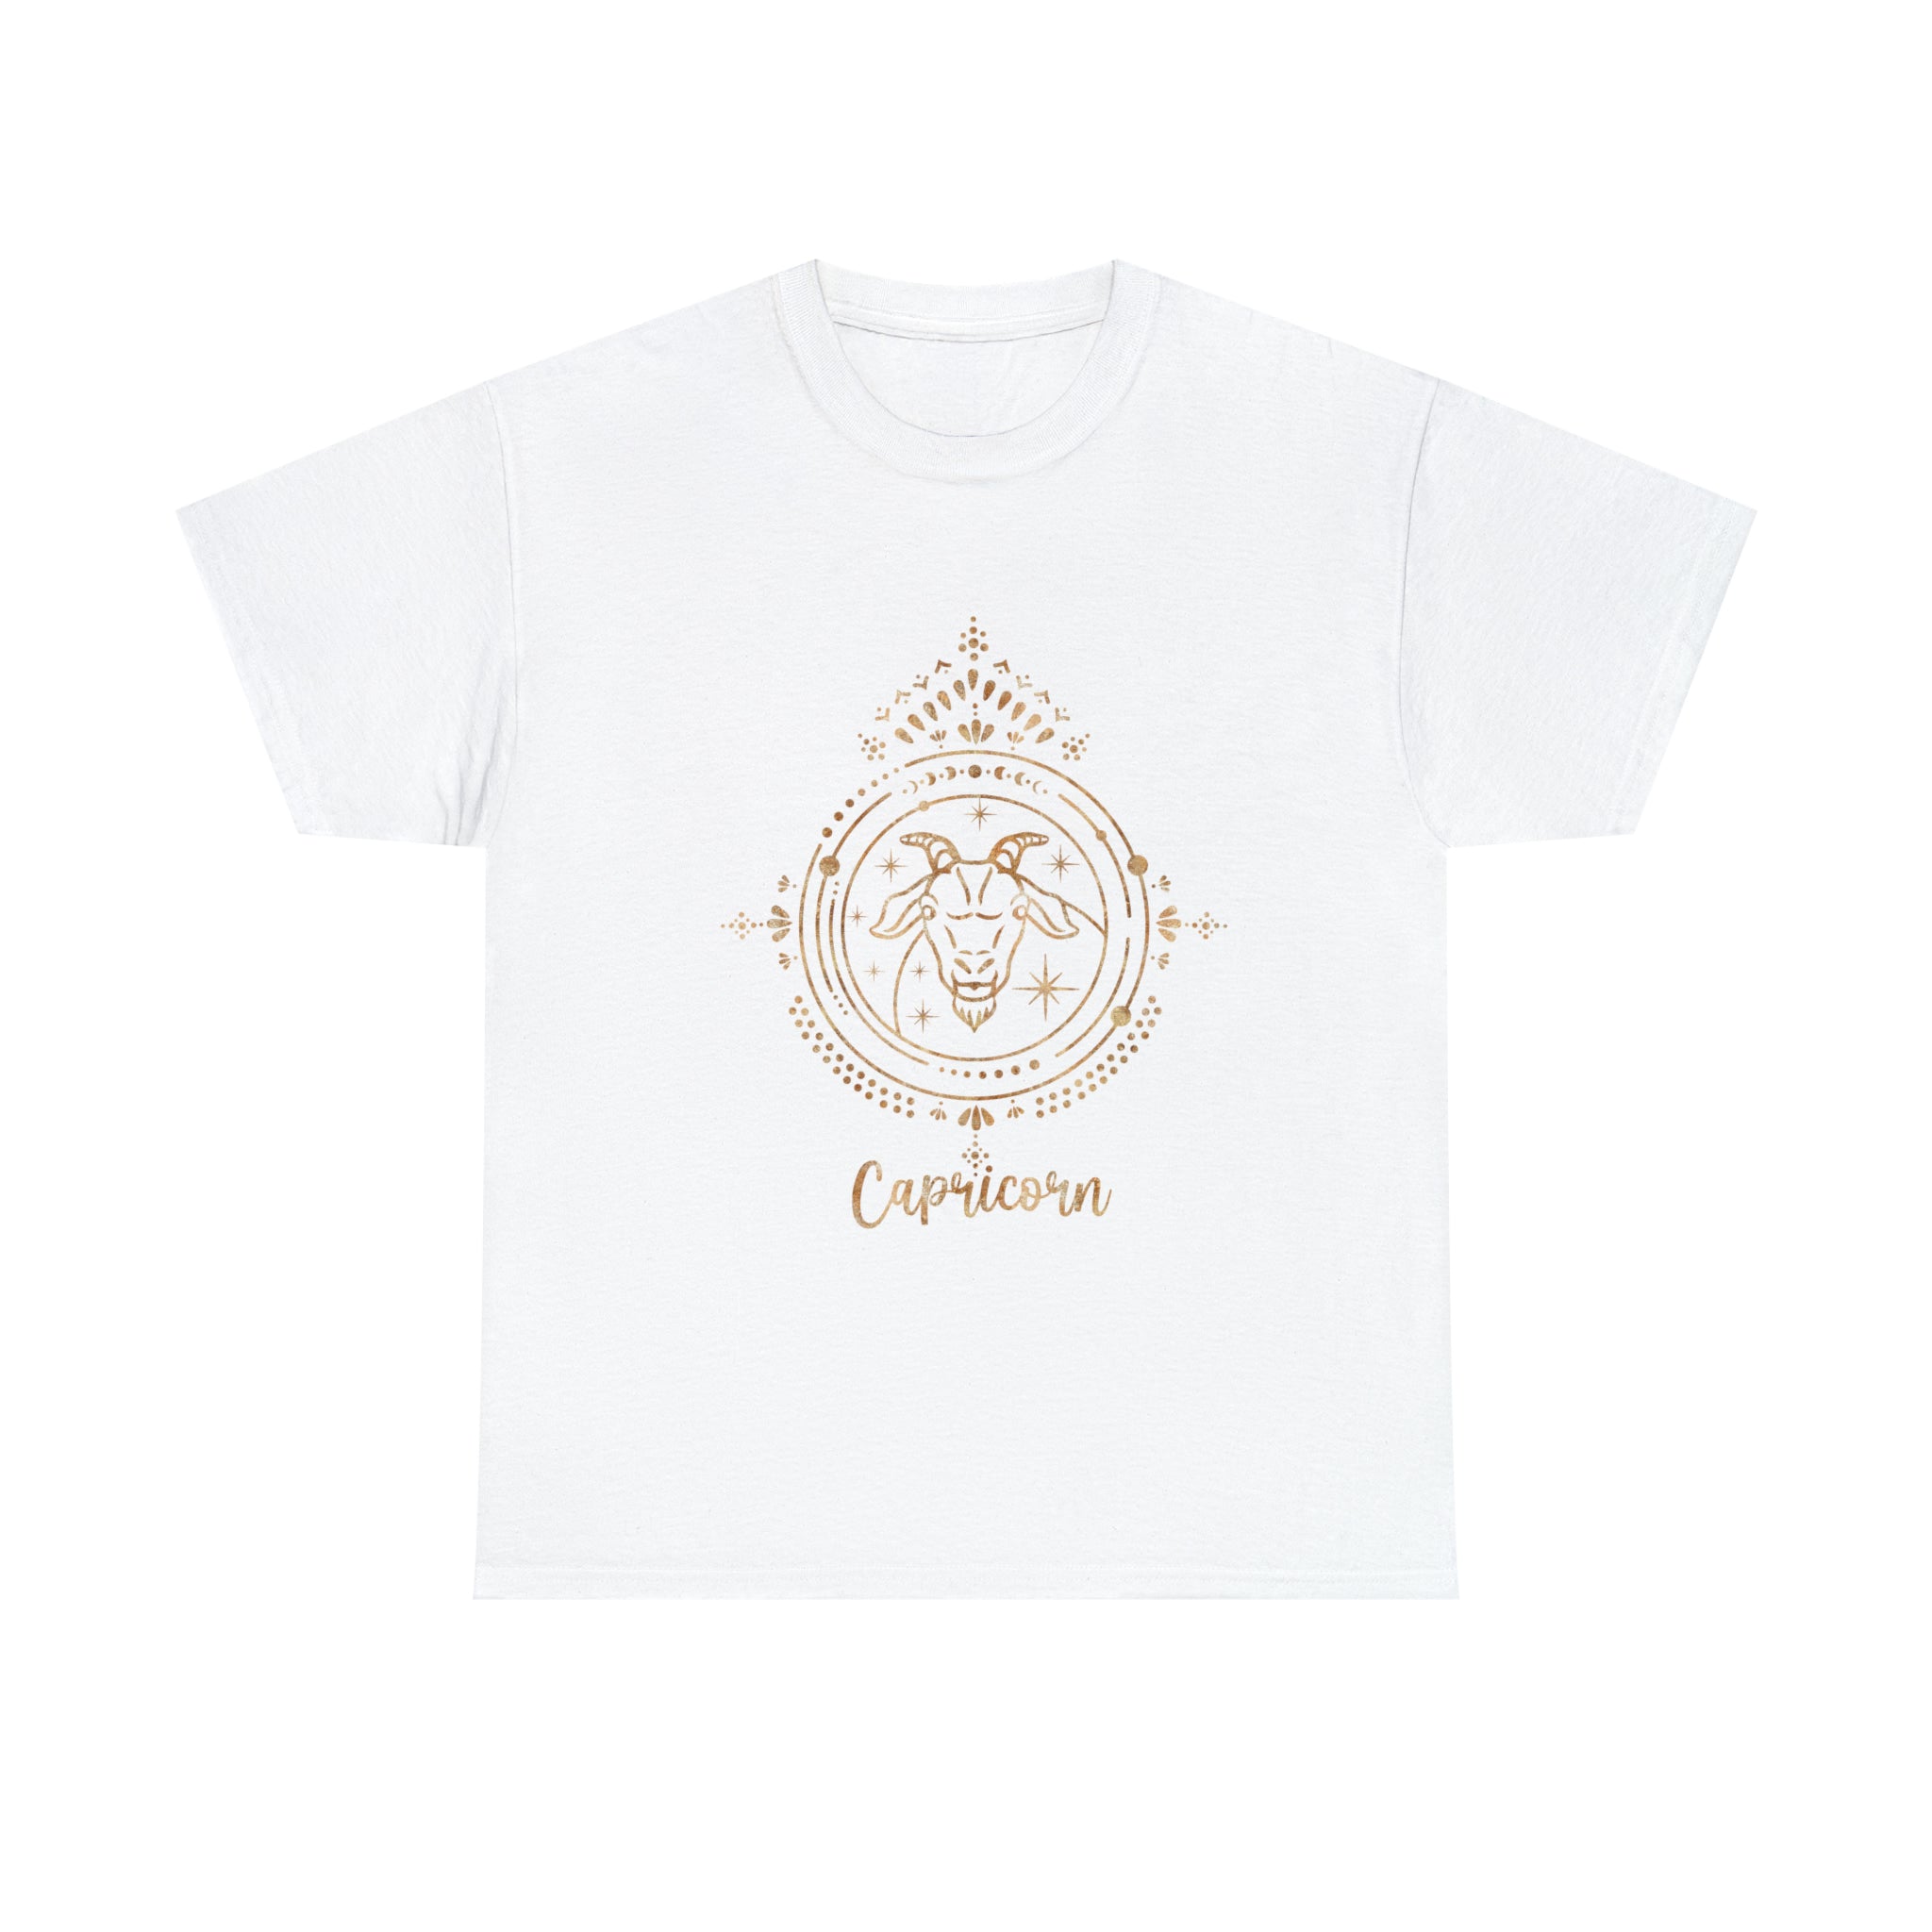 A white Capricorn t-shirt with an image of a lion on it. (Brand: Printify)